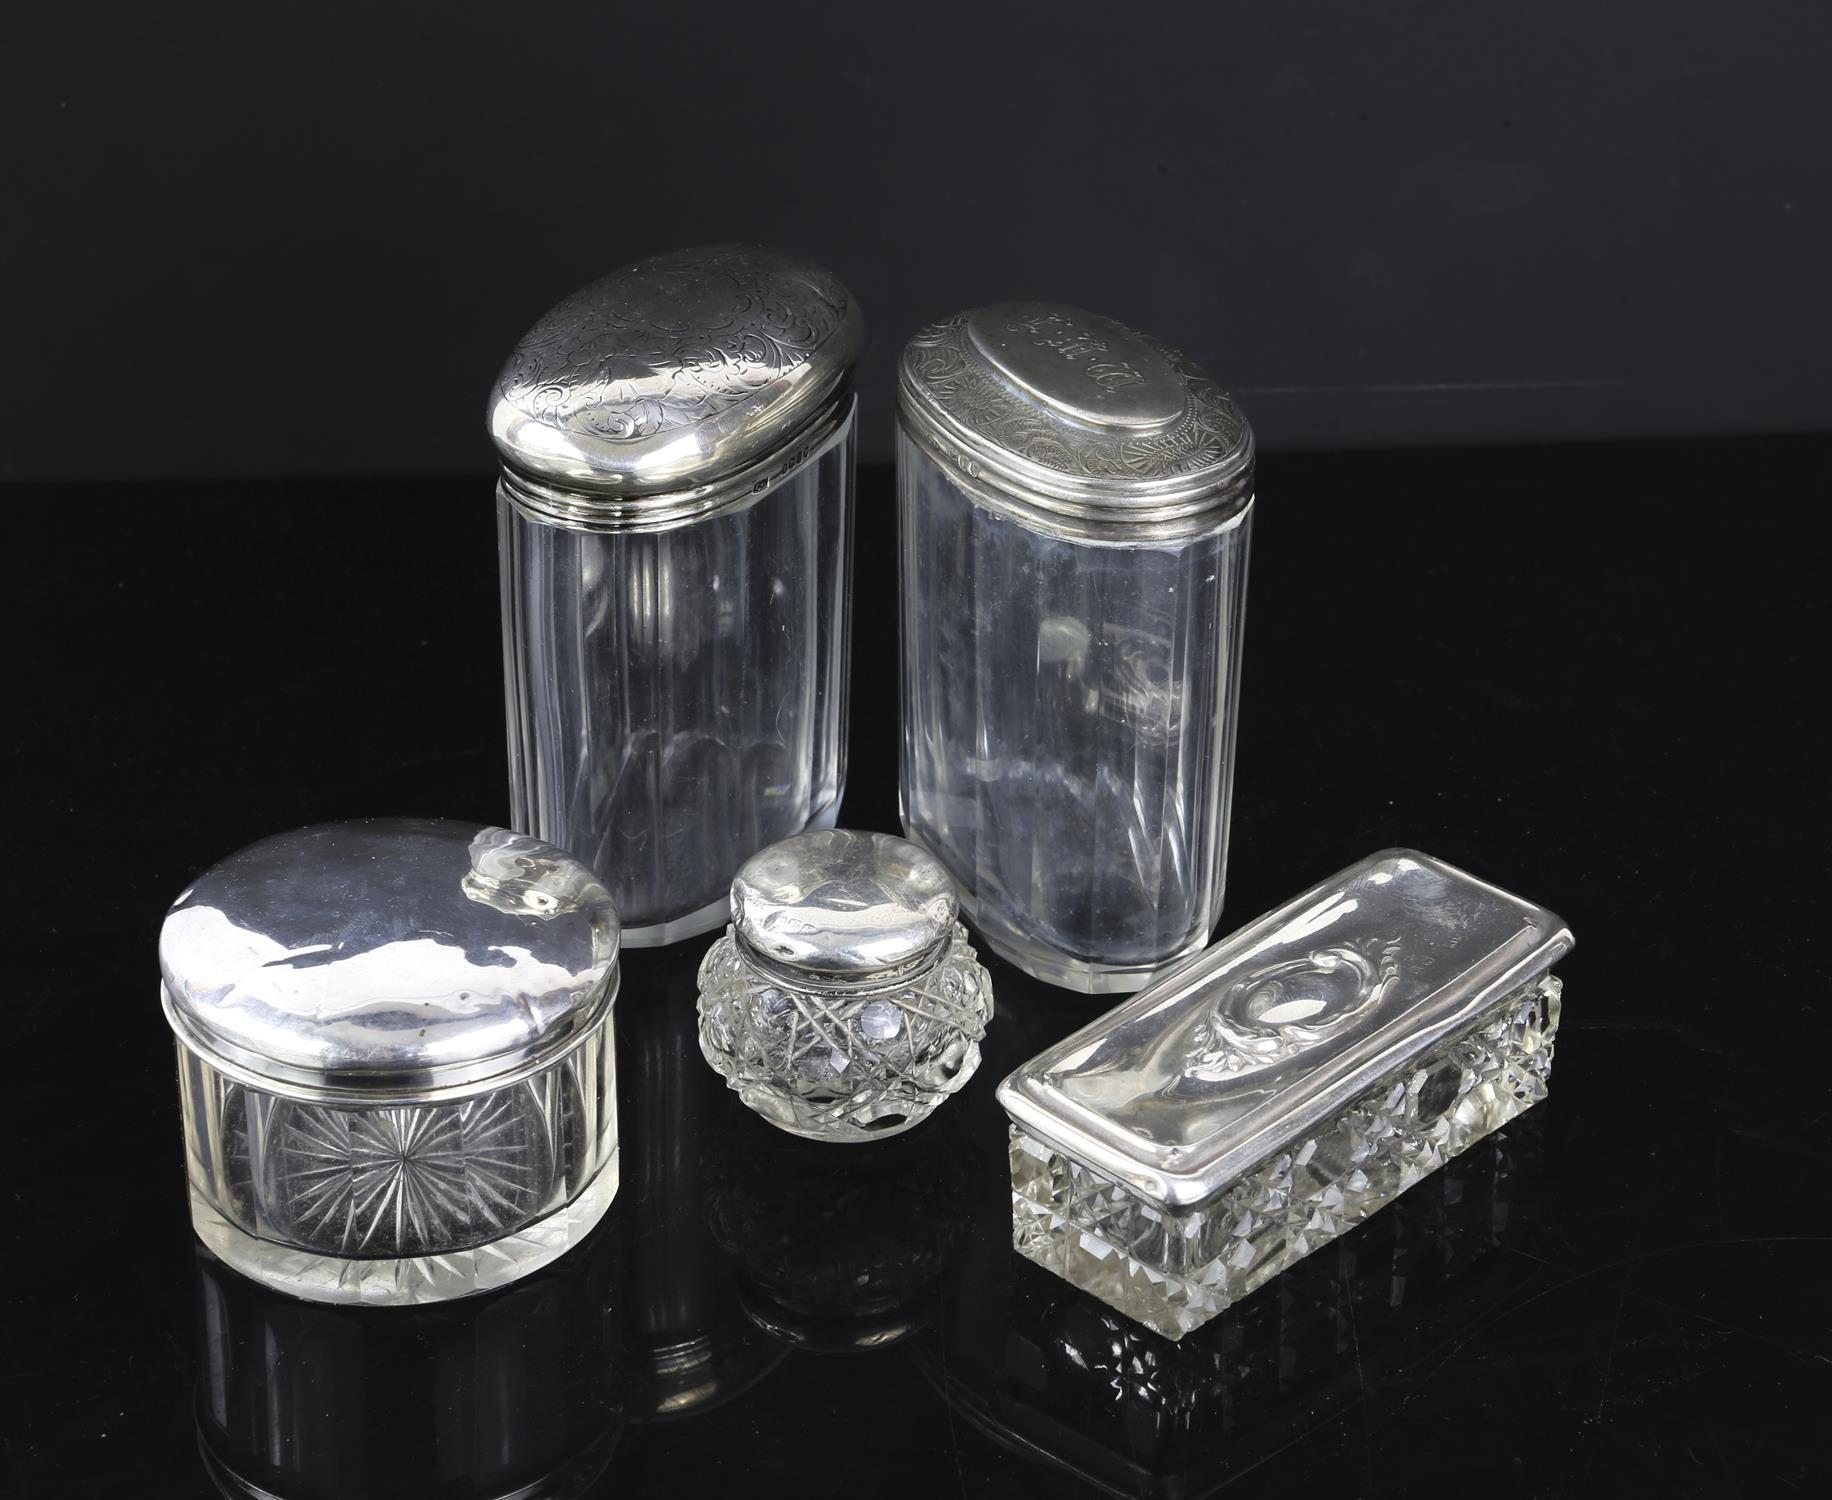 Selection of 5 silver topped dressing table jars and pots of varying sizes, shapes and ages